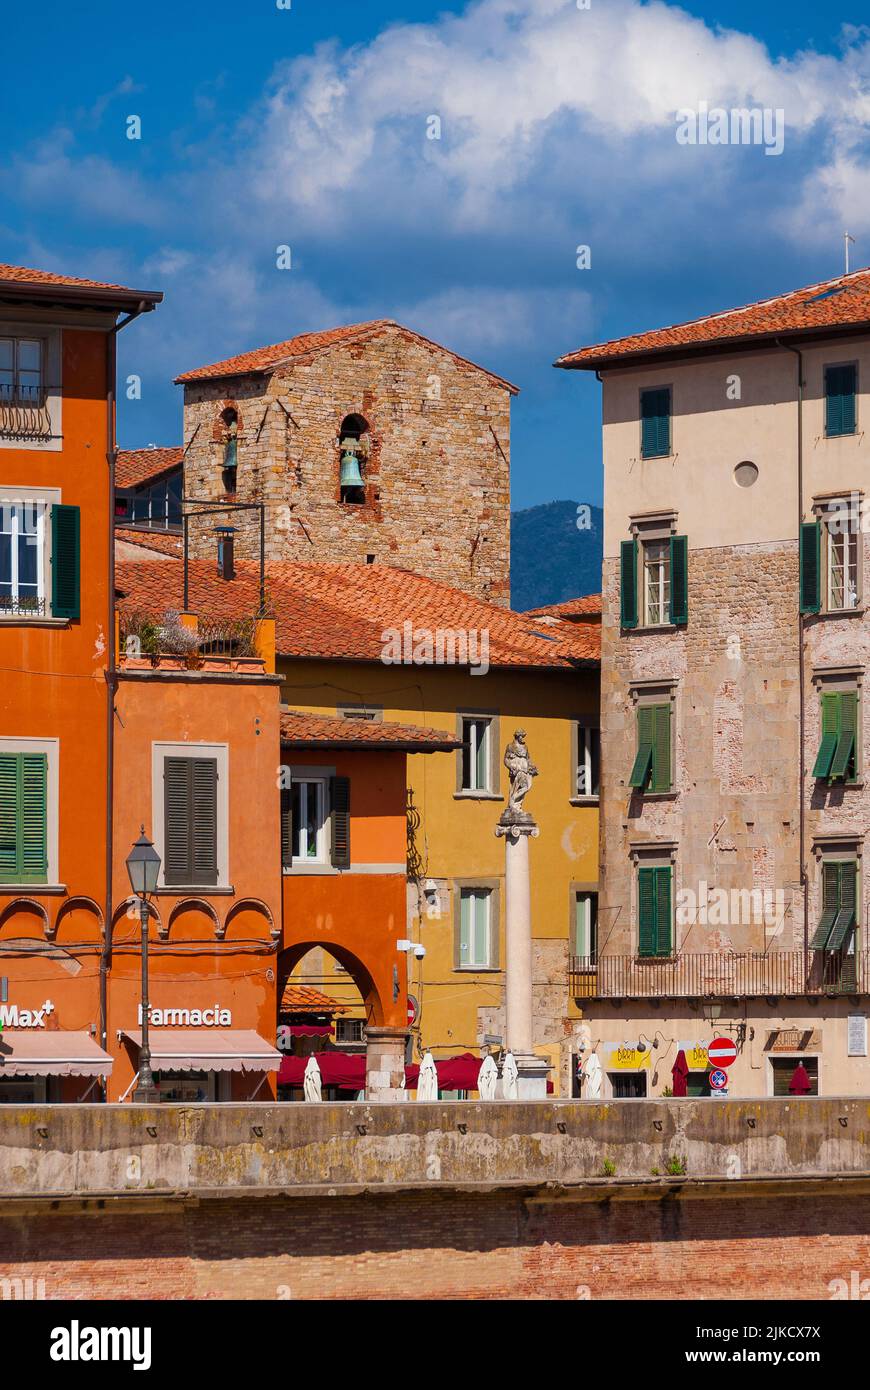 'Piazza Cairoli' Square in the historical center of Pisa, seen from Arno River Stock Photo